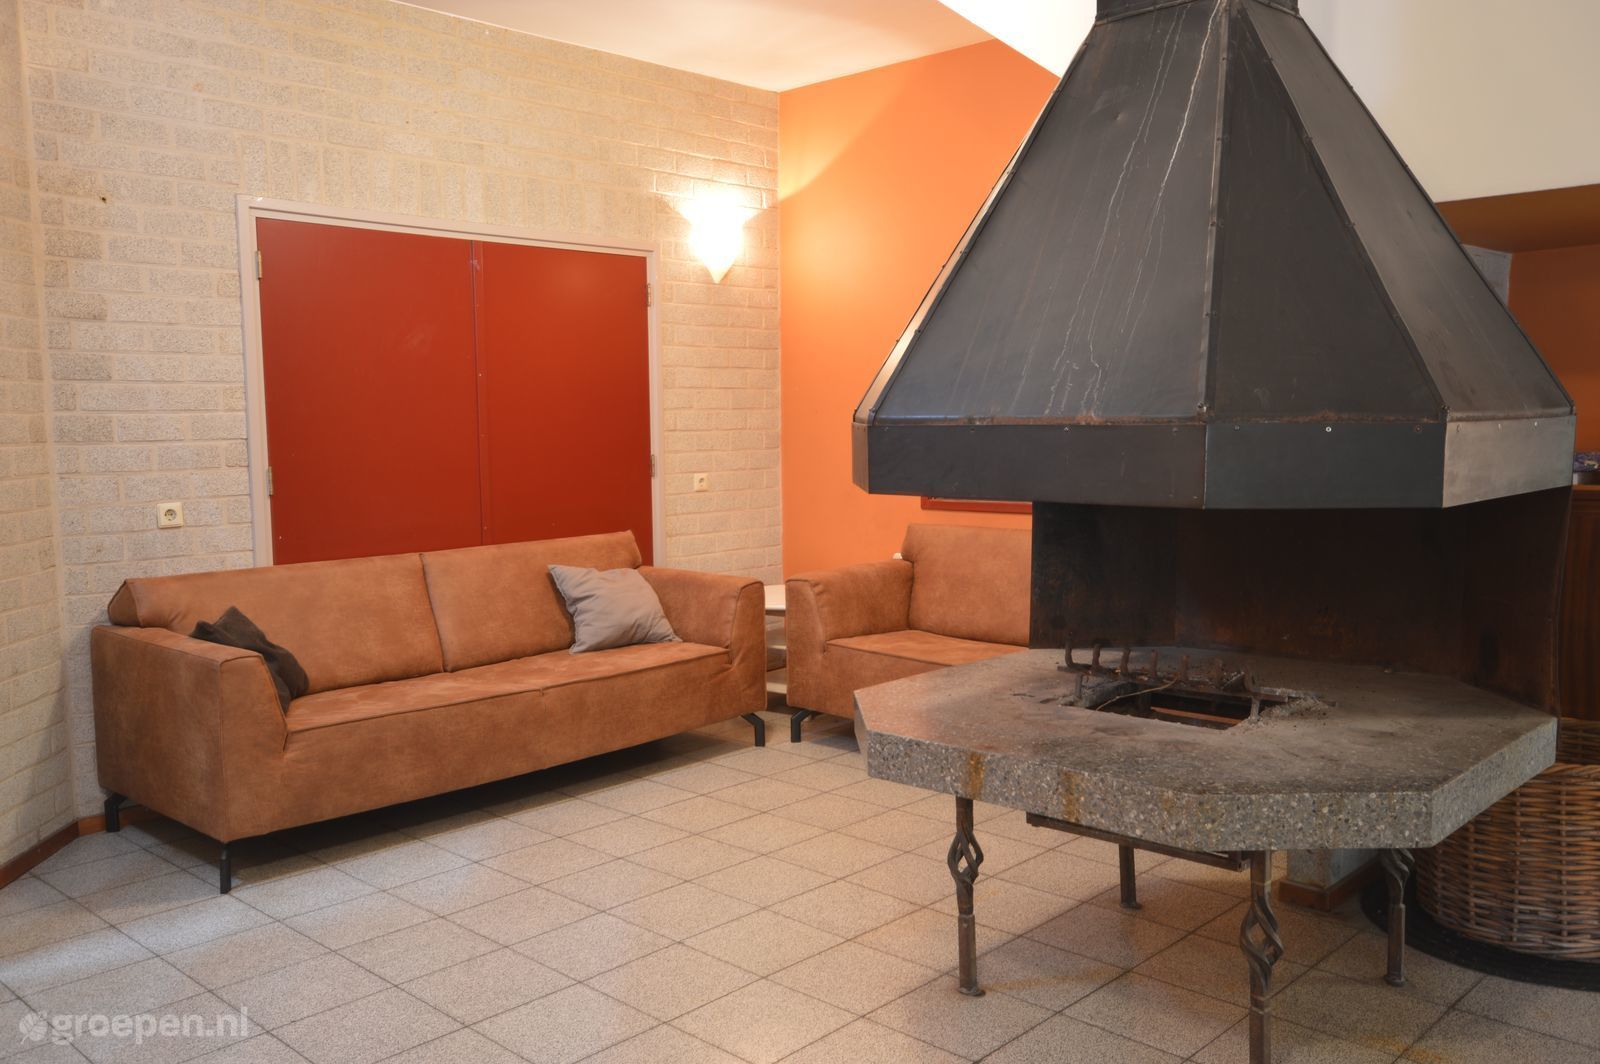 Group accommodation Ransdaal